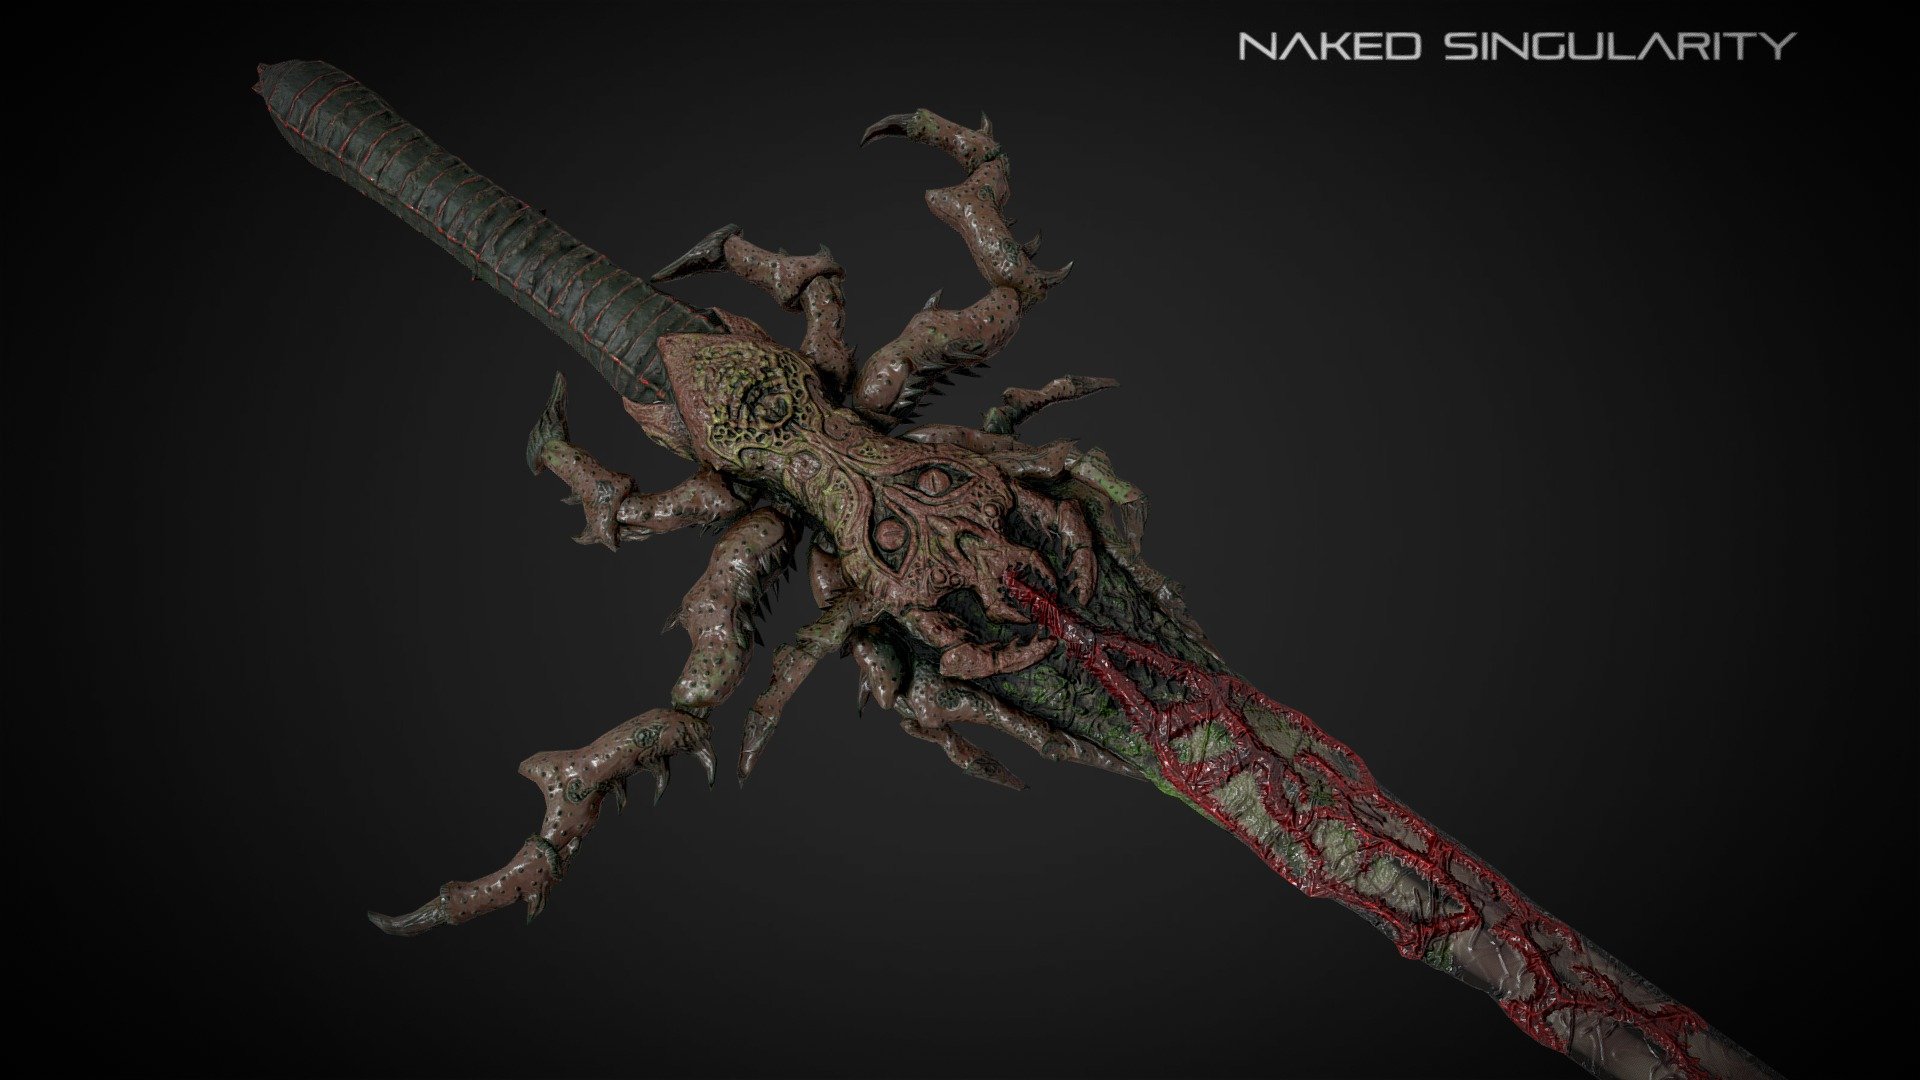 Living insect sword | Dark fantasy | 4K | PBR | Low poly

Original concept by Naked Singularity. Inspire by Dark Souls triology, Elden Ring and Half-Life.


Animation ready.
High quality low poly model.
High resolution texture.
Real world scale.
PBR texturing.
Blender file provided.

Check out other Dark fantasy game asset here

Customer support: nakedsingularity.studio@gmail.com

Follow us on: Youtube | Facebook | Instagram | Twitter | Artstation - Living insect sword | Dark fantasy | 4K | PBR - Buy Royalty Free 3D model by Naked Singularity (@nakedsingularity) 3d model